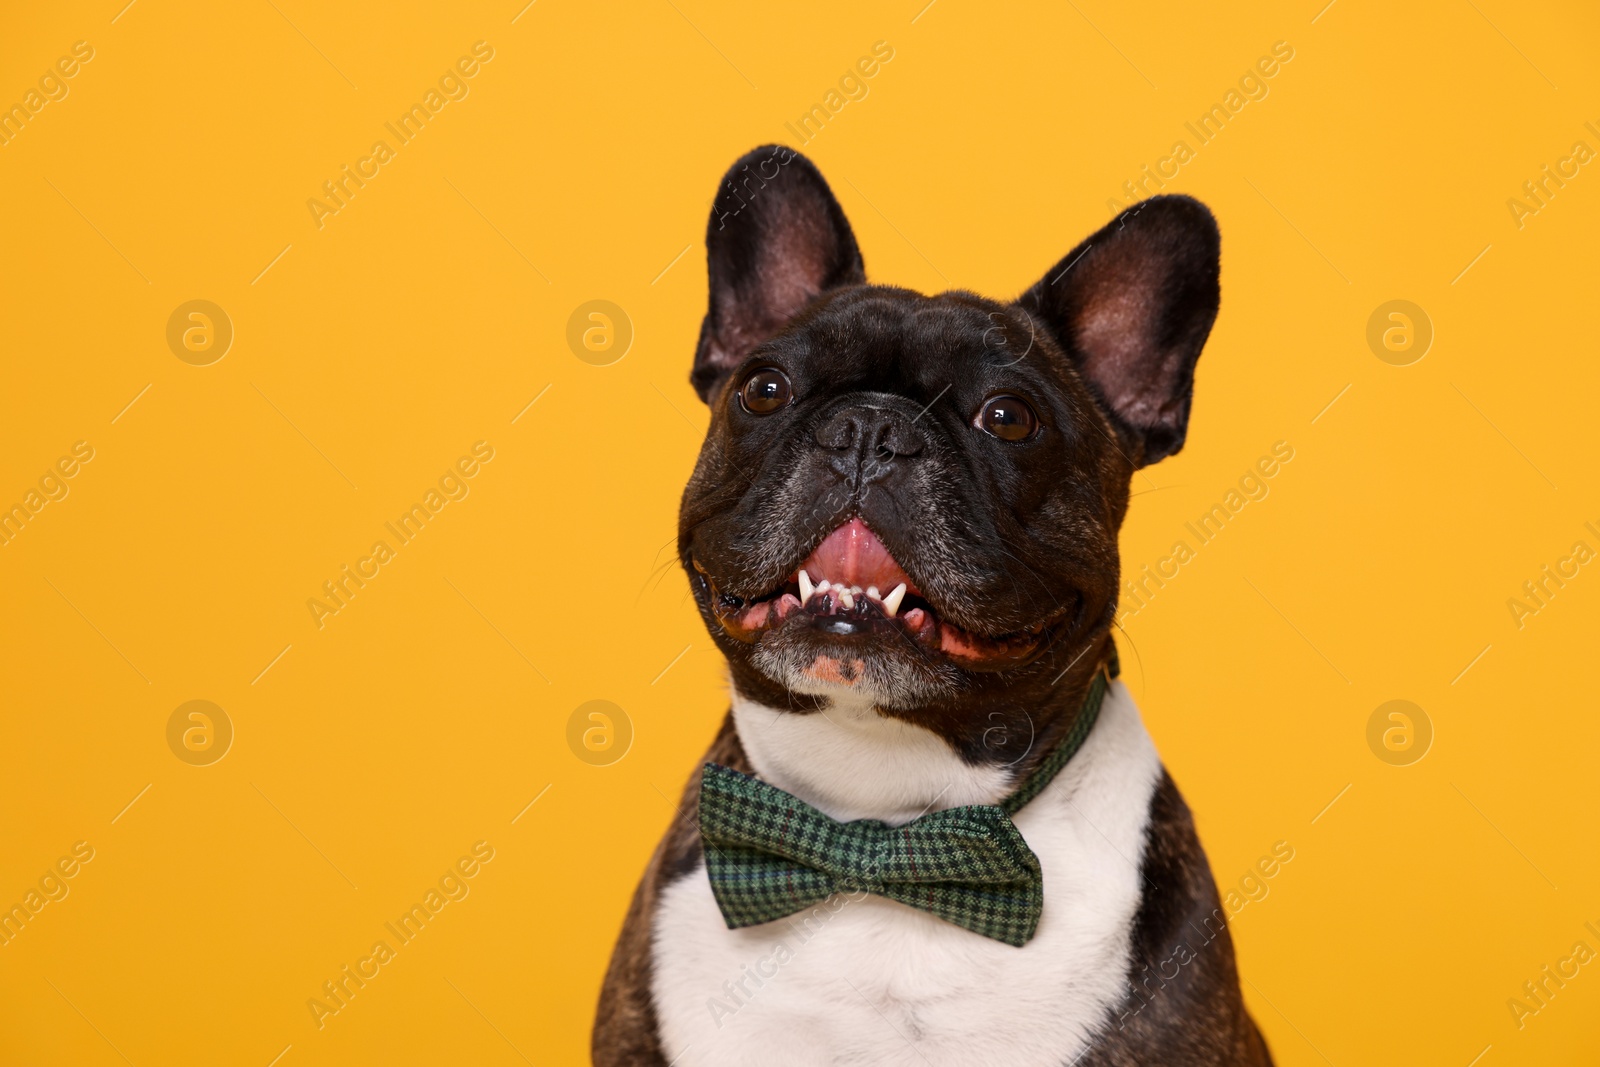 Photo of Adorable French Bulldog with bow tie on orange background